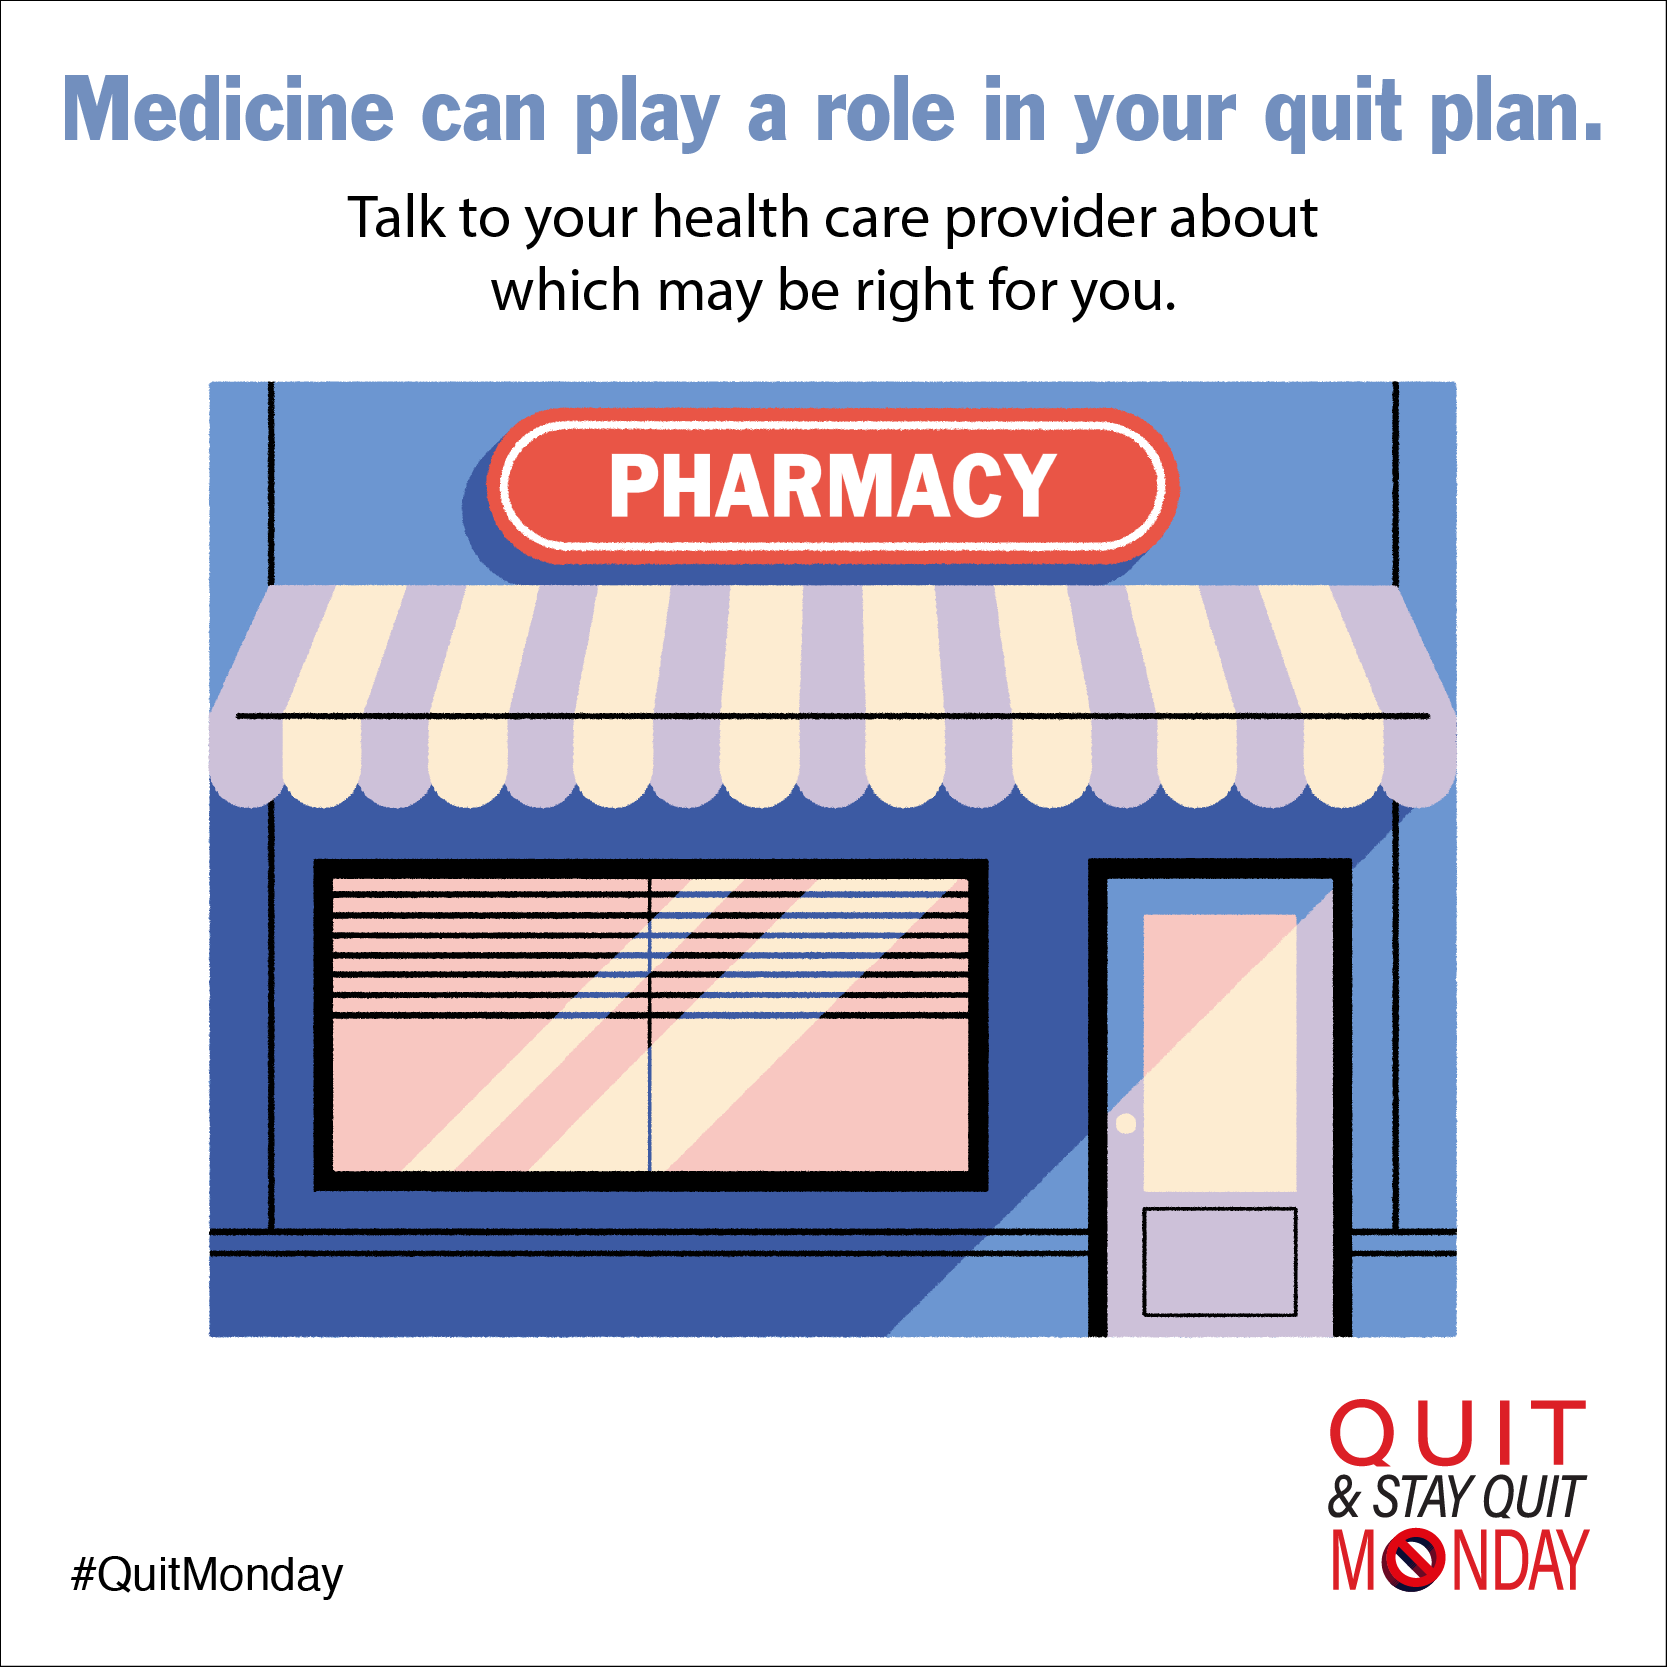 Medicine can play a role in your quit plan. Talk to your health care provider about which may be right for you.